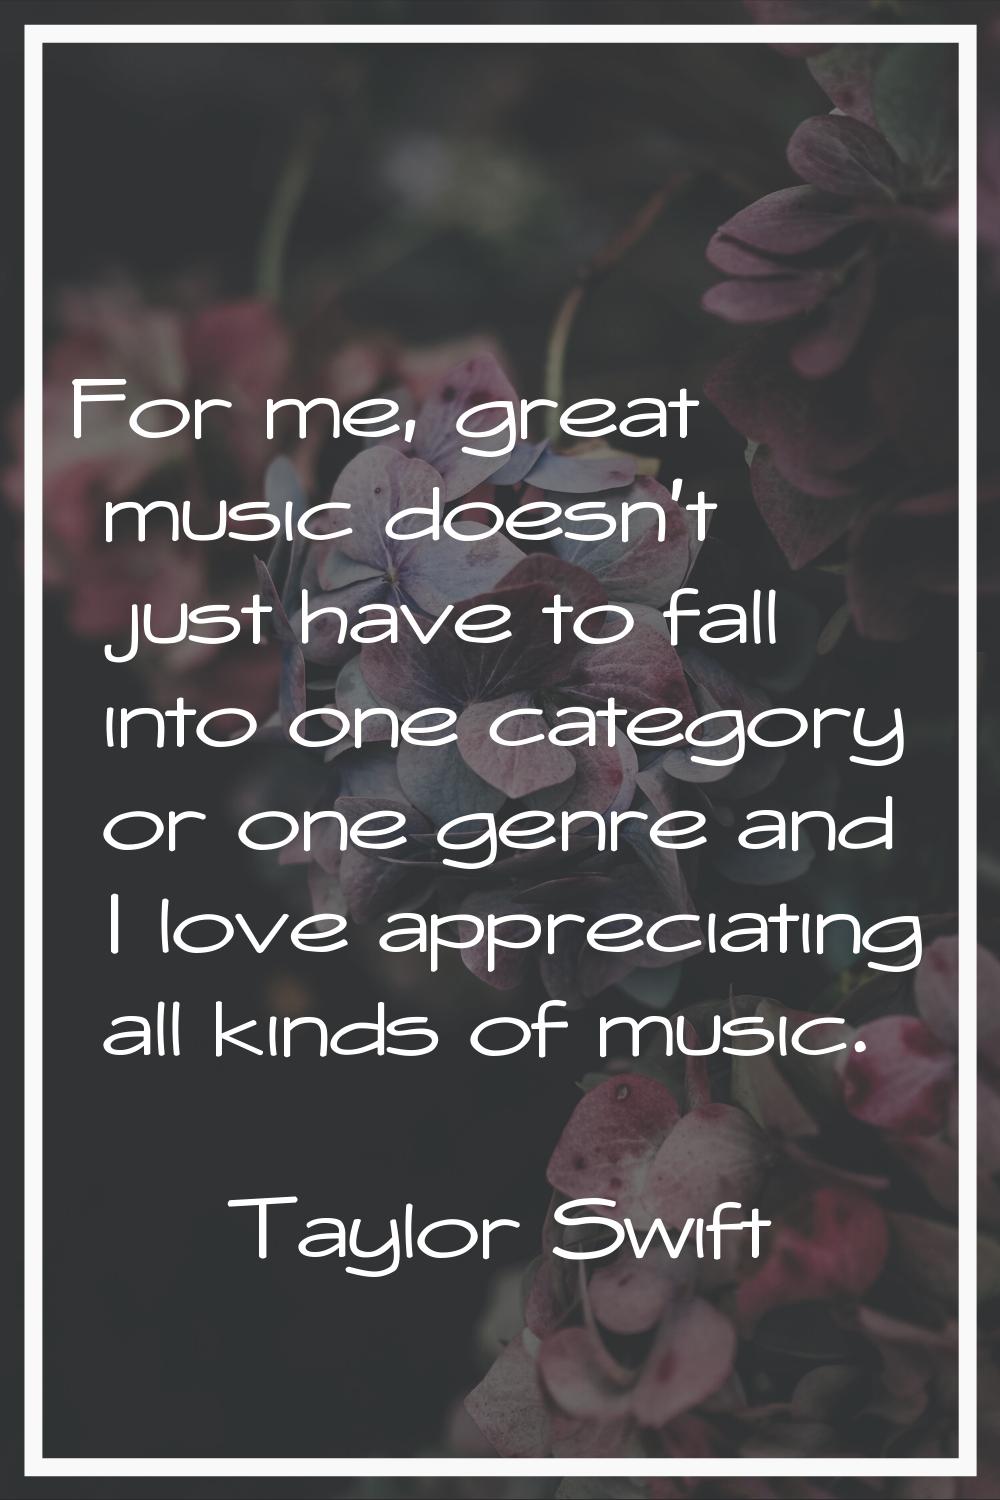 For me, great music doesn't just have to fall into one category or one genre and I love appreciatin